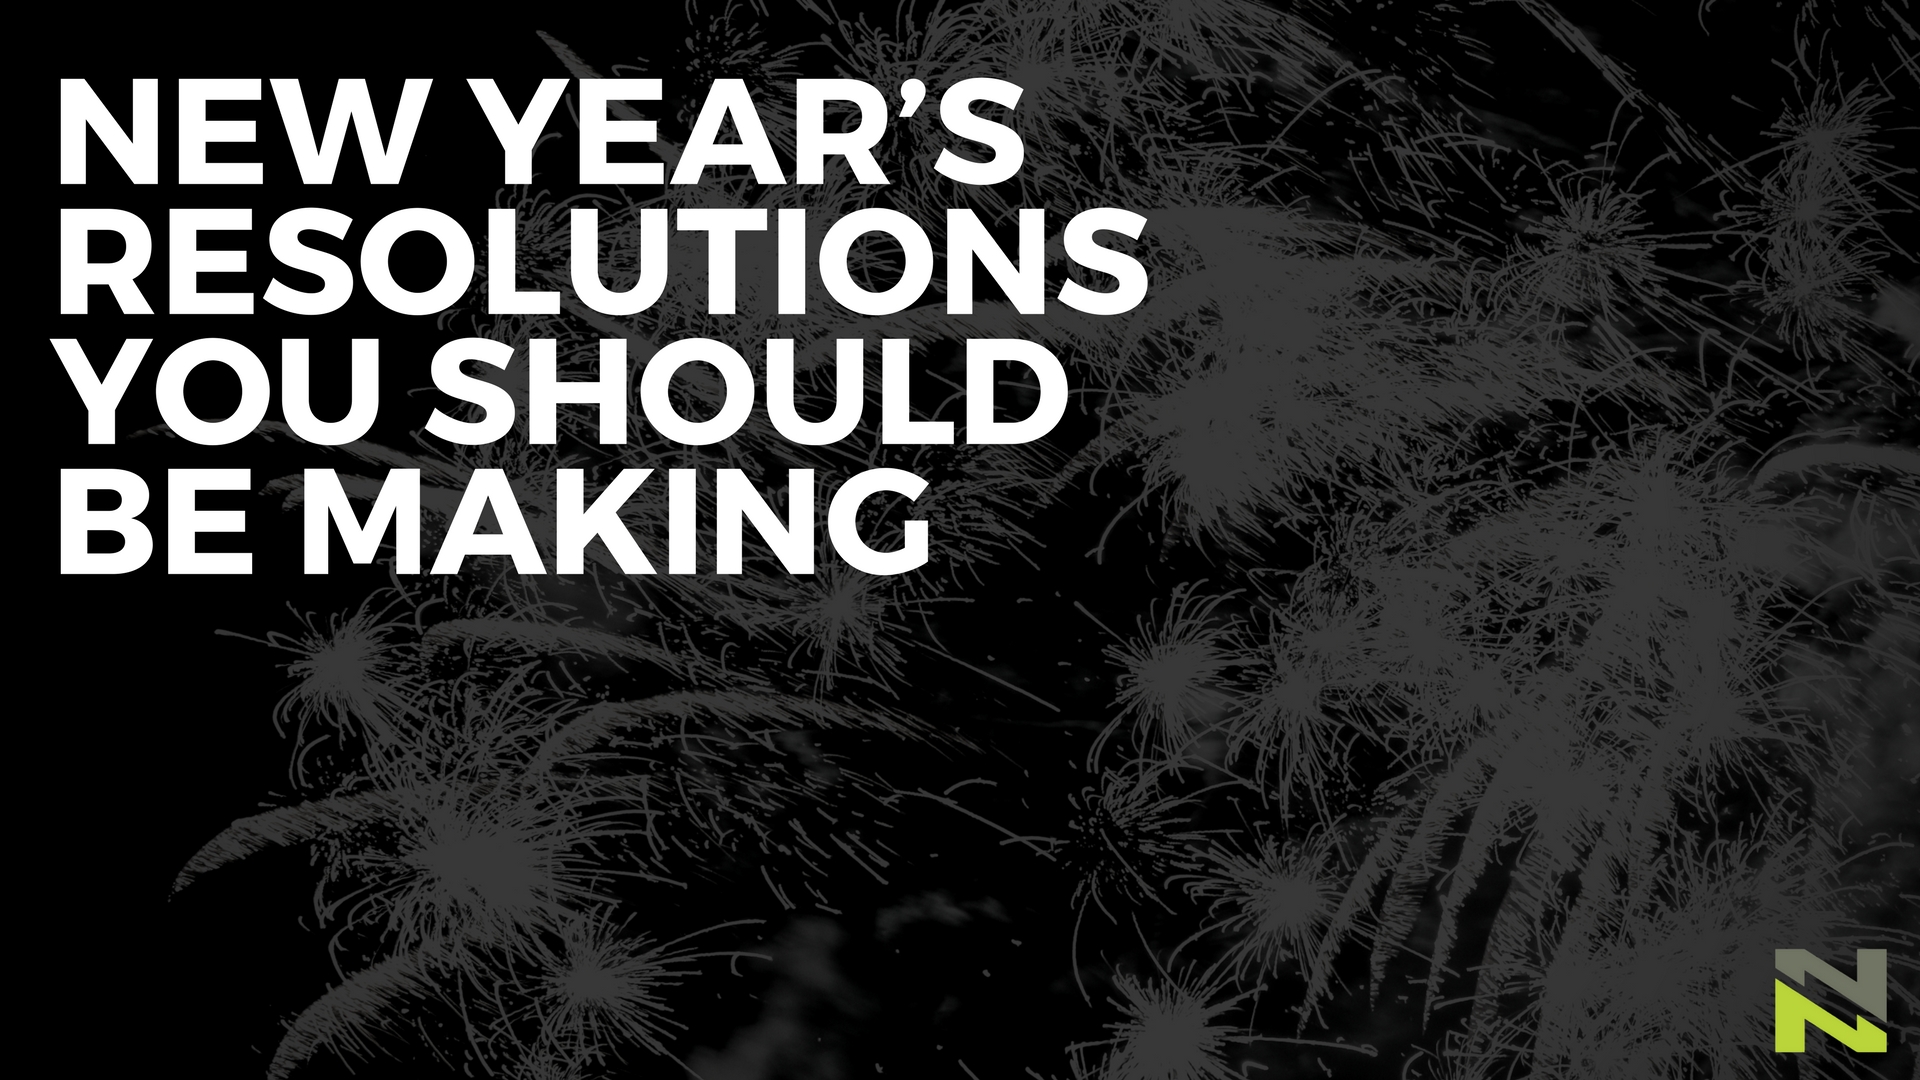 New Year’s Resolutions You Should Be Making